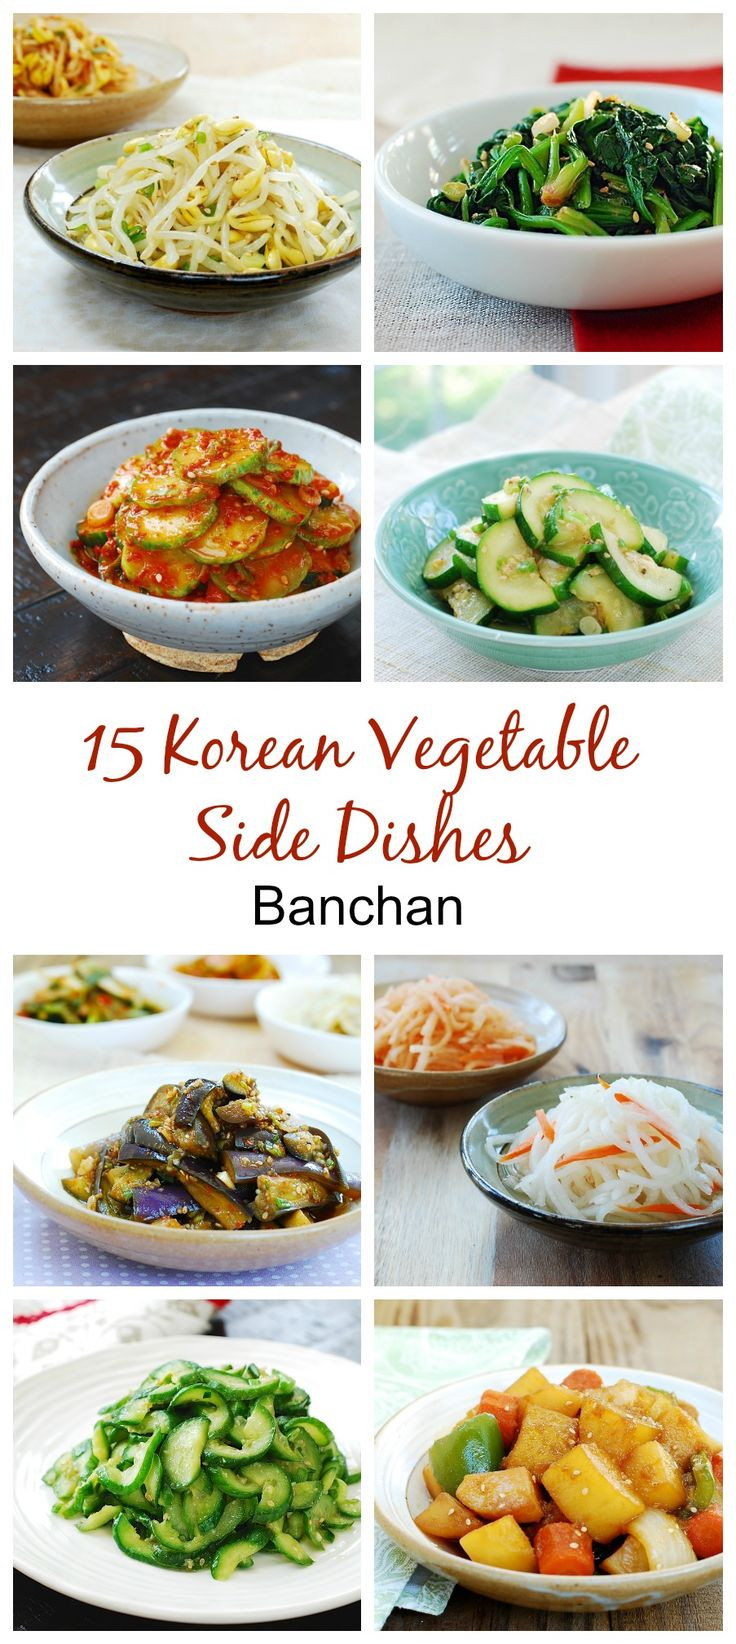 Healthy Korean Food Recipes
 25 best ideas about Korean side dishes on Pinterest